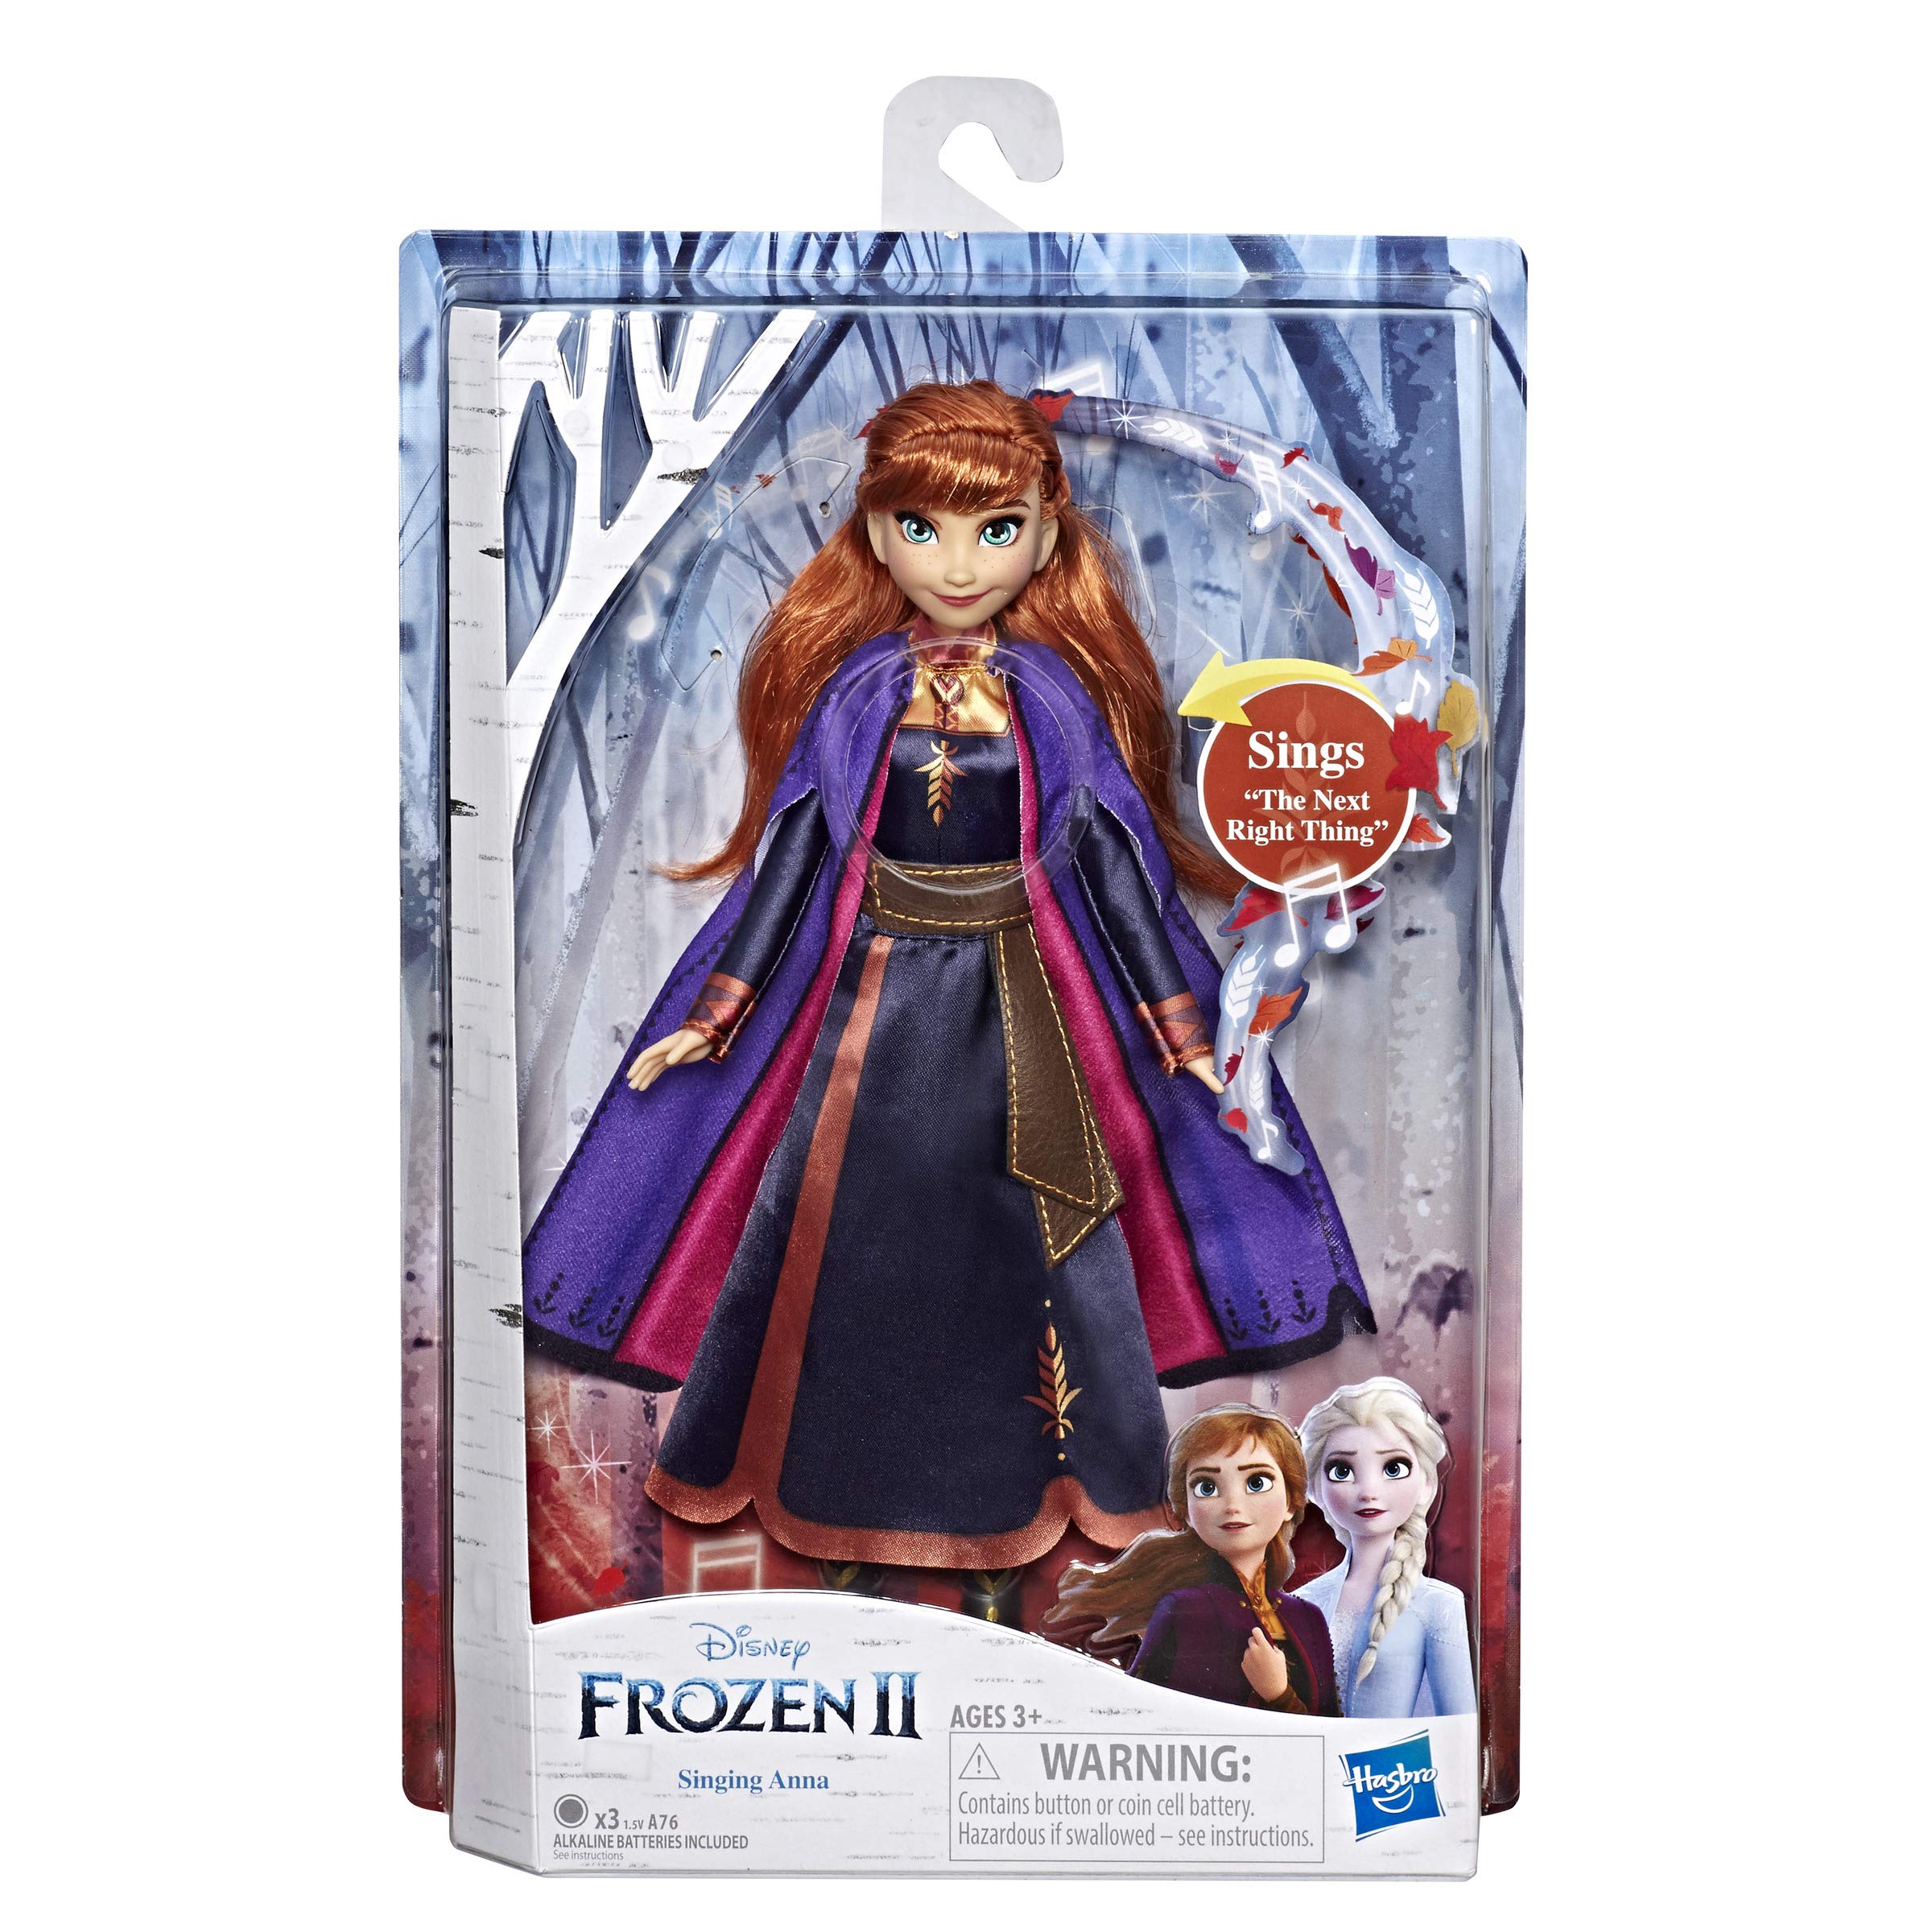 Disney Frozen Singing Anna Fashion Doll with Music Wearing A Purple Dress Inspired by 2, Toy for Kids 3 Years & Up, Includes doll, outfit, boots, and instructions.